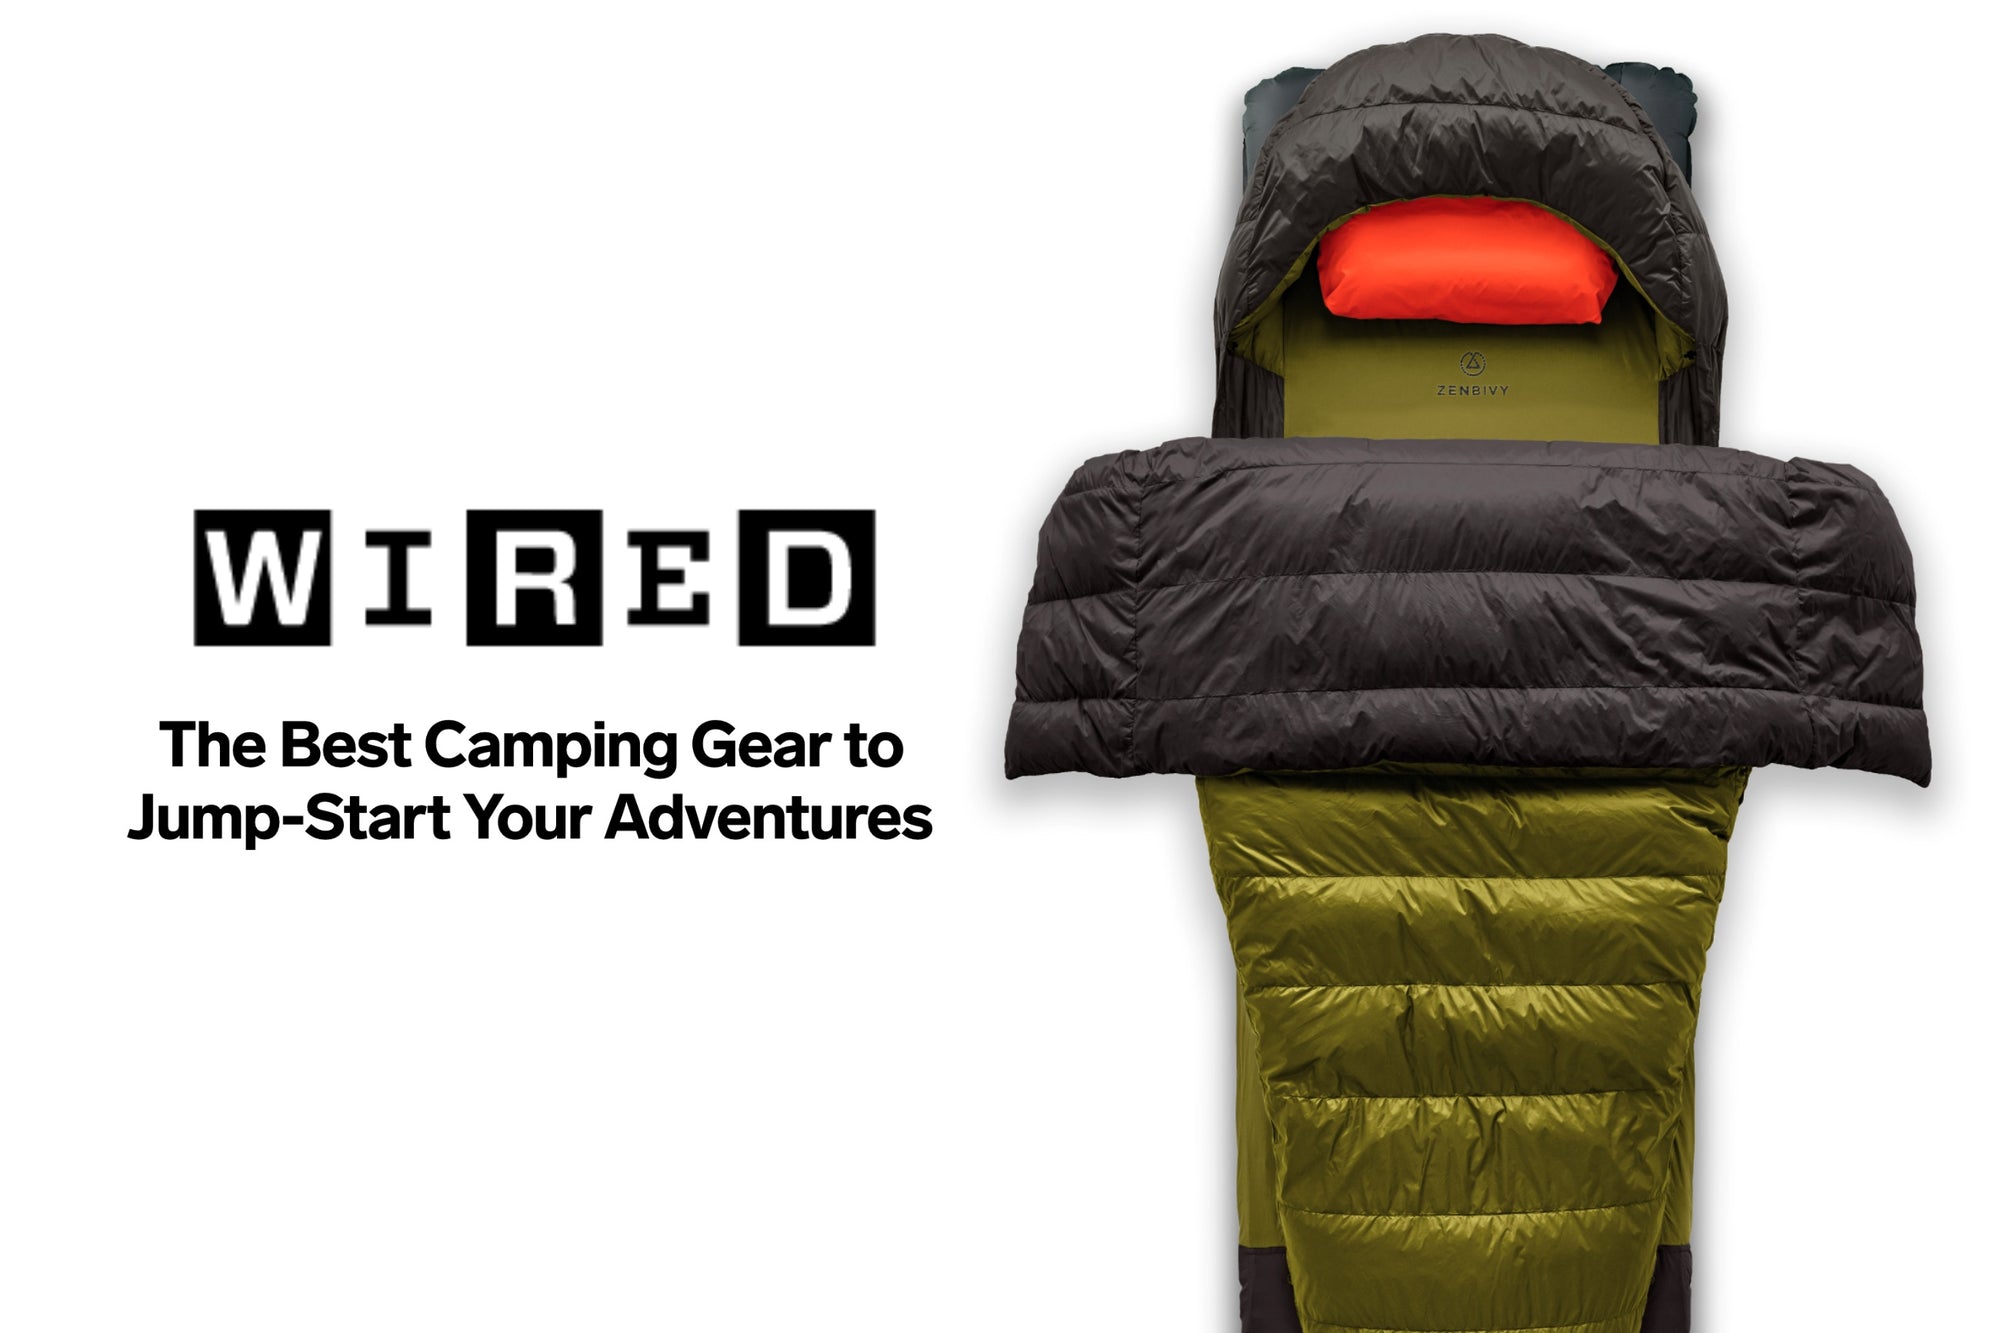 PRESS: Wired includes Light Bed in Best Camping Gear